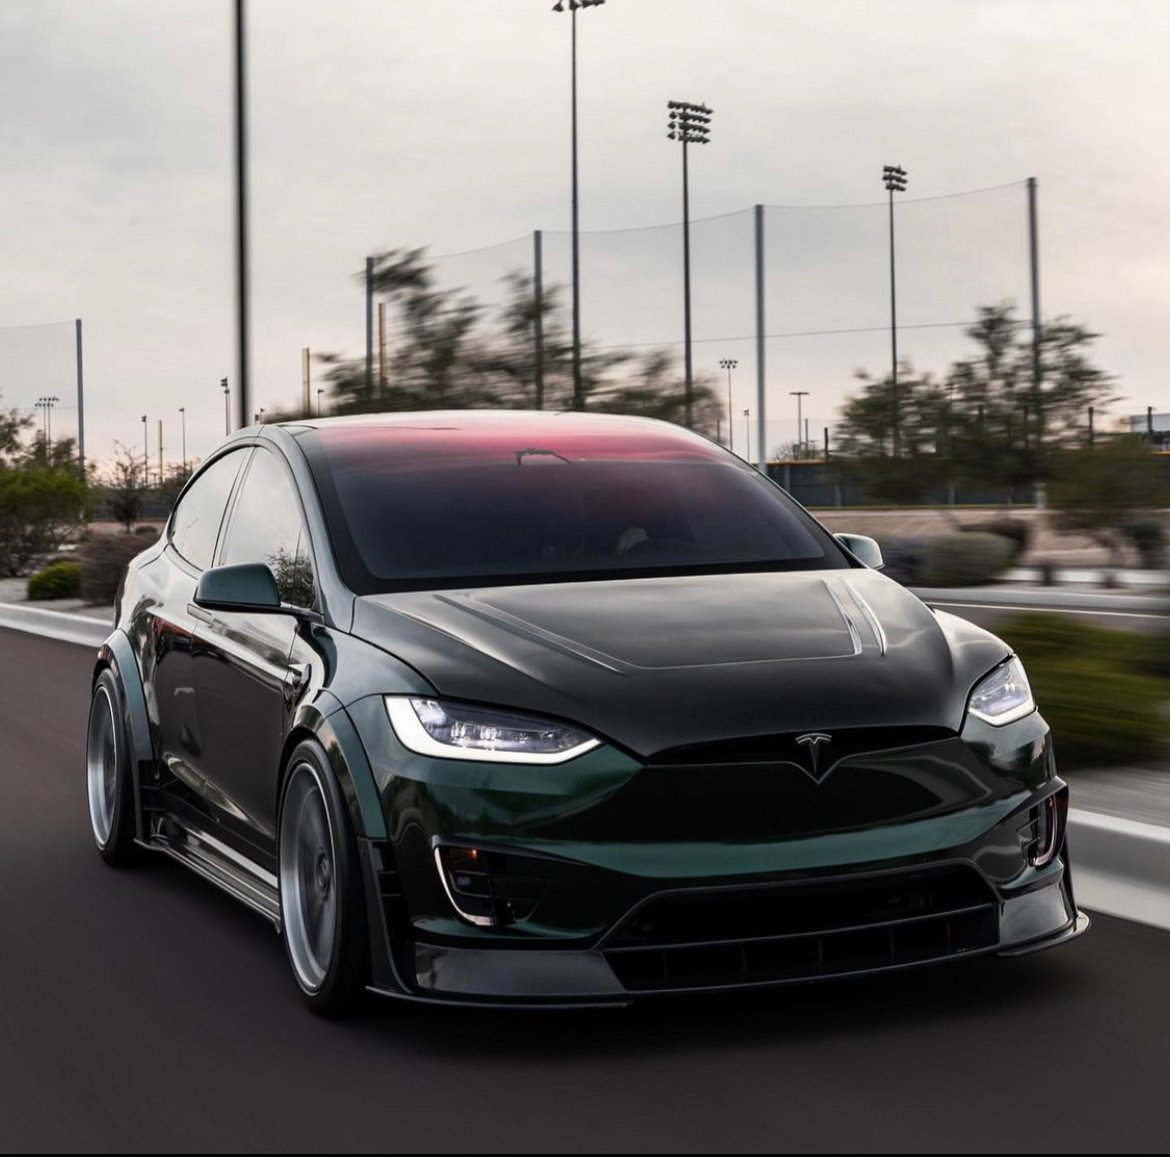 WIDE BODY KIT for TESLA Model Y FRONT BUMPER SIDE SKIRTS ARCHES DIFFUSER  SPOILER